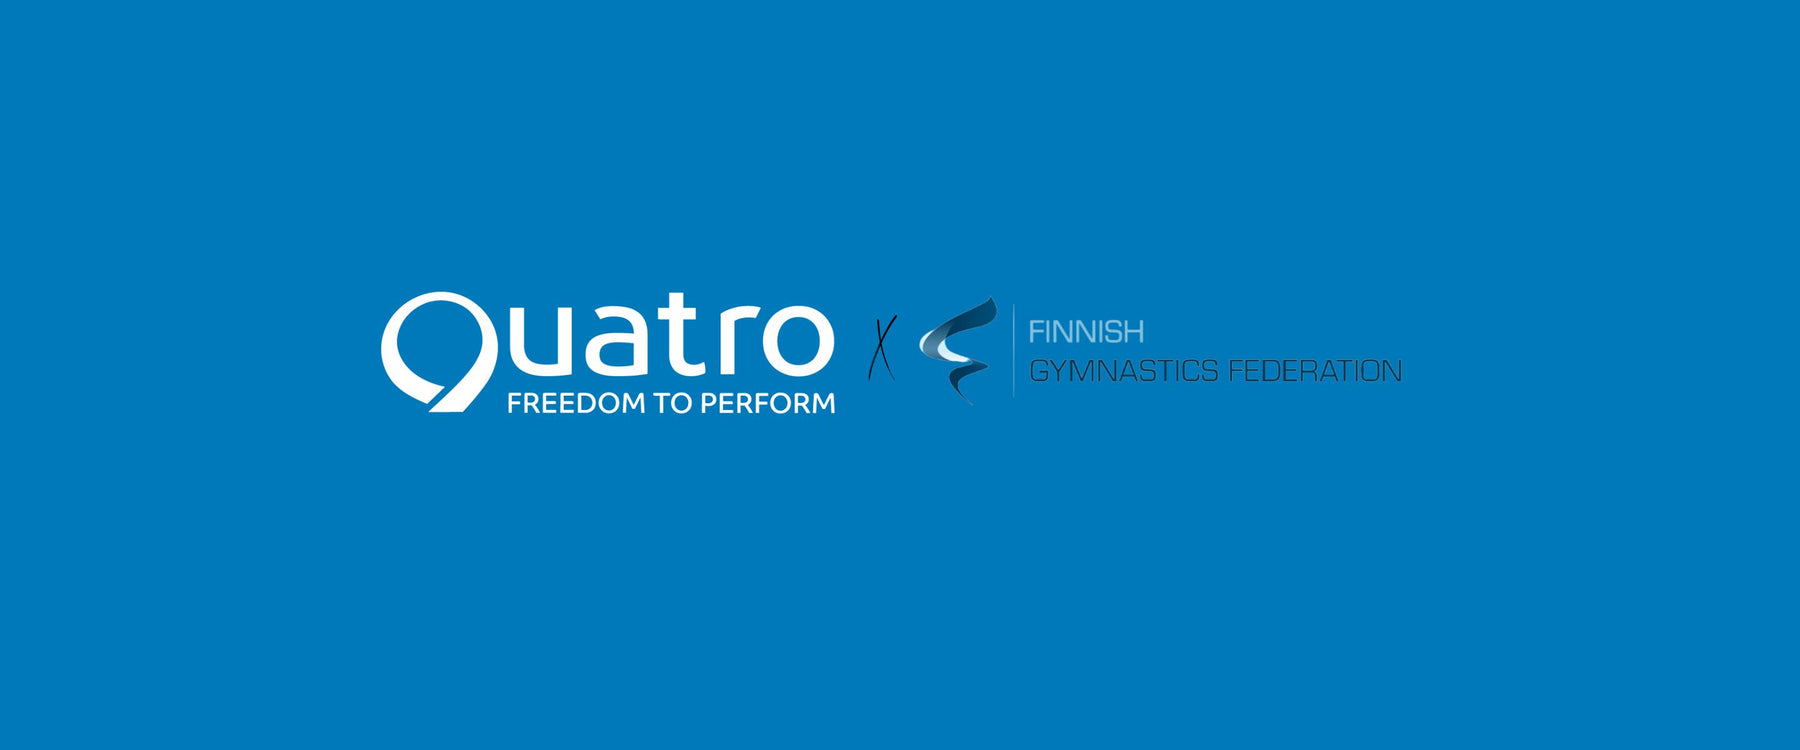 Quatro Gymnastics and the Finland Gymnastics Federation Join Together in a New Partnership